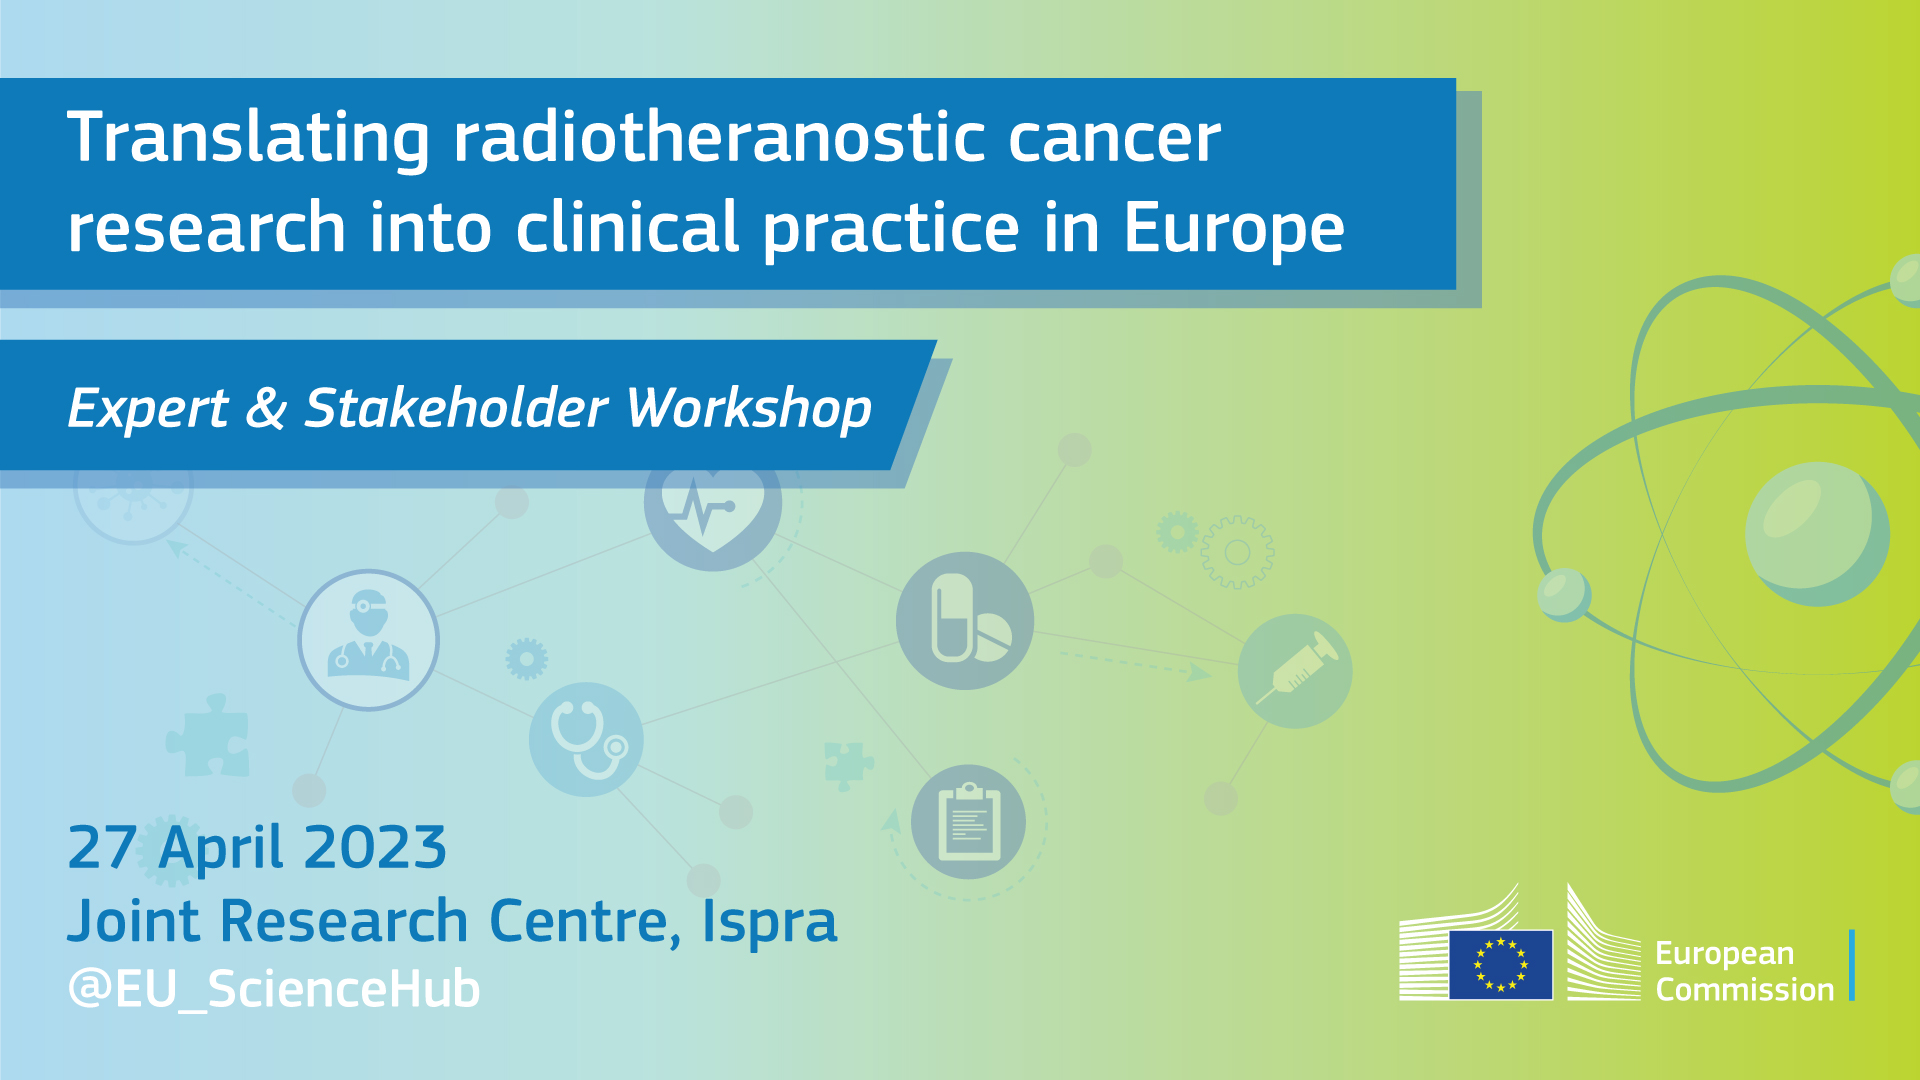 Translating radiotheranostic cancer research into clinical practice in Europe - Workshop